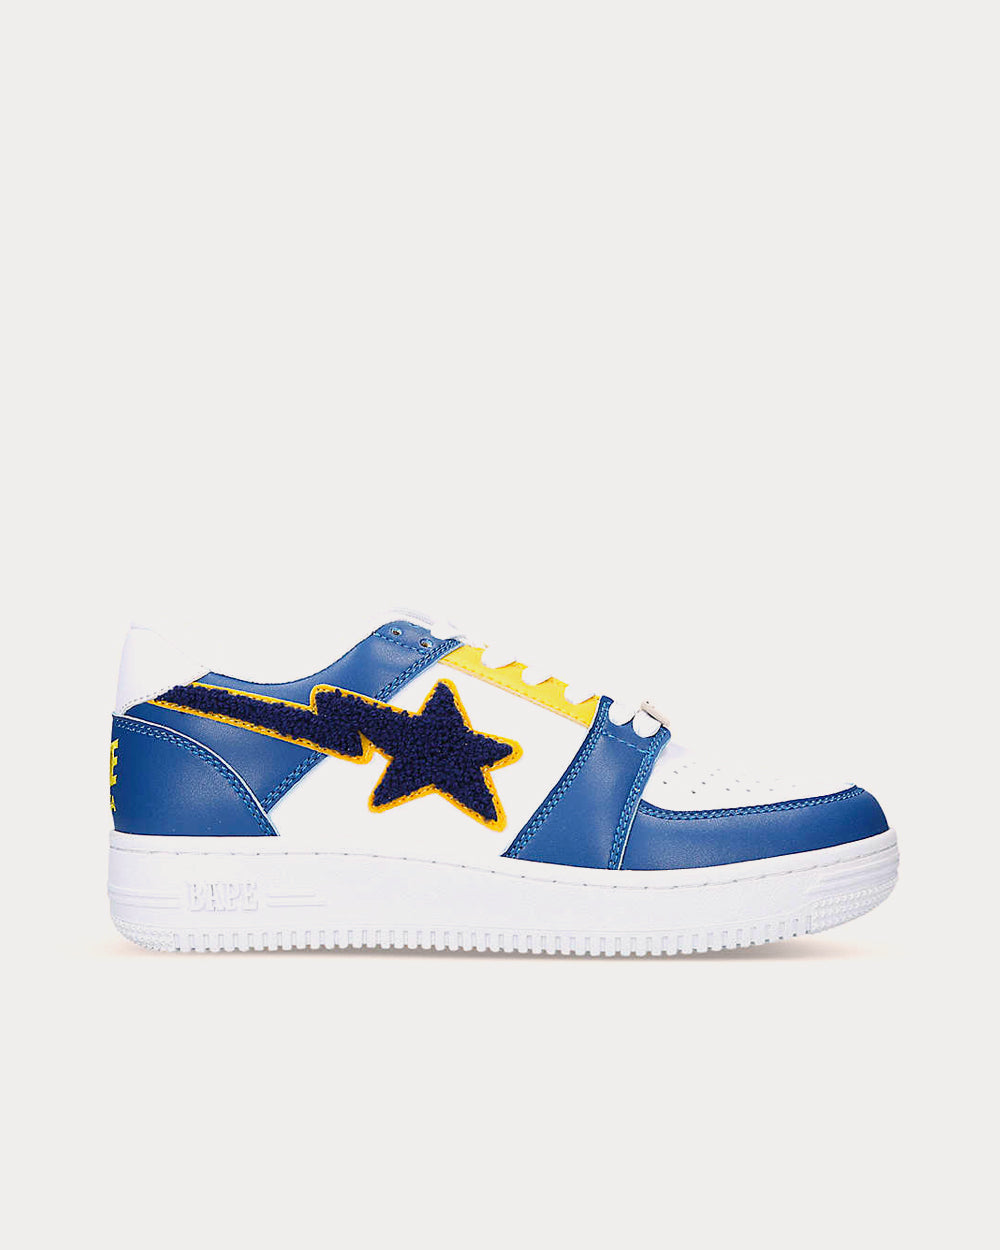 BAPE STA Colour-Blocked Navy / White Low Top Sneakers